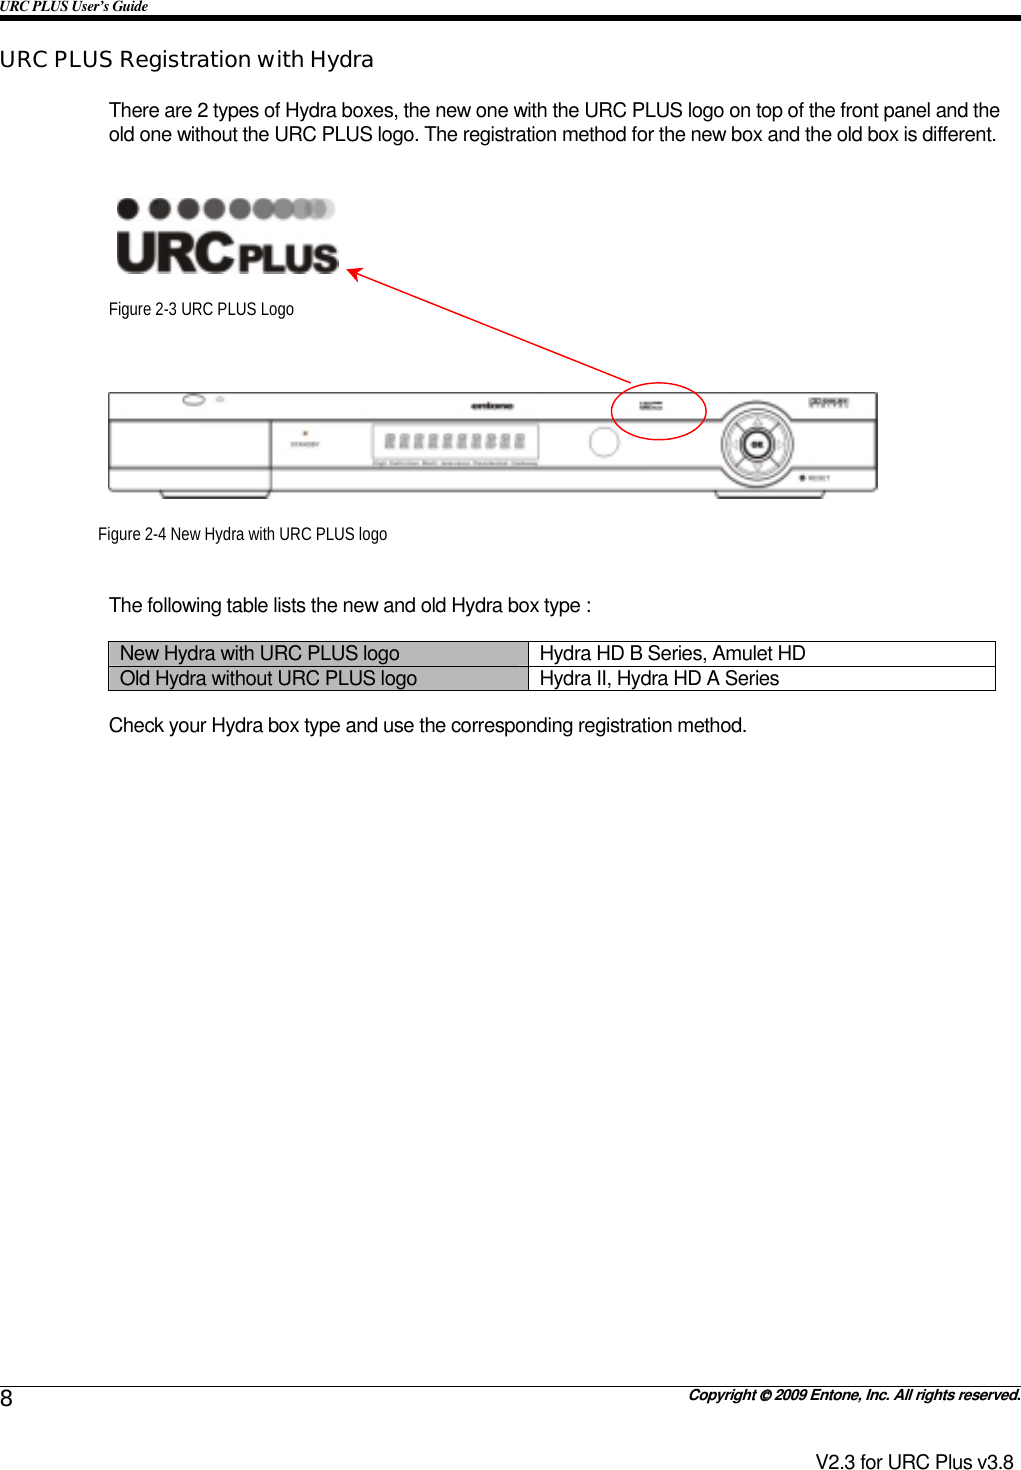 URC PLUS User’s Guide   Copyright  2009 Entone, Inc. All rights reserved. 8 V2.3 for URC Plus v3.8 URC PLUS Registration with Hydra  There are 2 types of Hydra boxes, the new one with the URC PLUS logo on top of the front panel and the old one without the URC PLUS logo. The registration method for the new box and the old box is different.   Figure 2-3 URC PLUS Logo   Figure 2-4 New Hydra with URC PLUS logo  The following table lists the new and old Hydra box type : New Hydra with URC PLUS logo  Hydra HD B Series, Amulet HD Old Hydra without URC PLUS logo  Hydra II, Hydra HD A Series  Check your Hydra box type and use the corresponding registration method. 